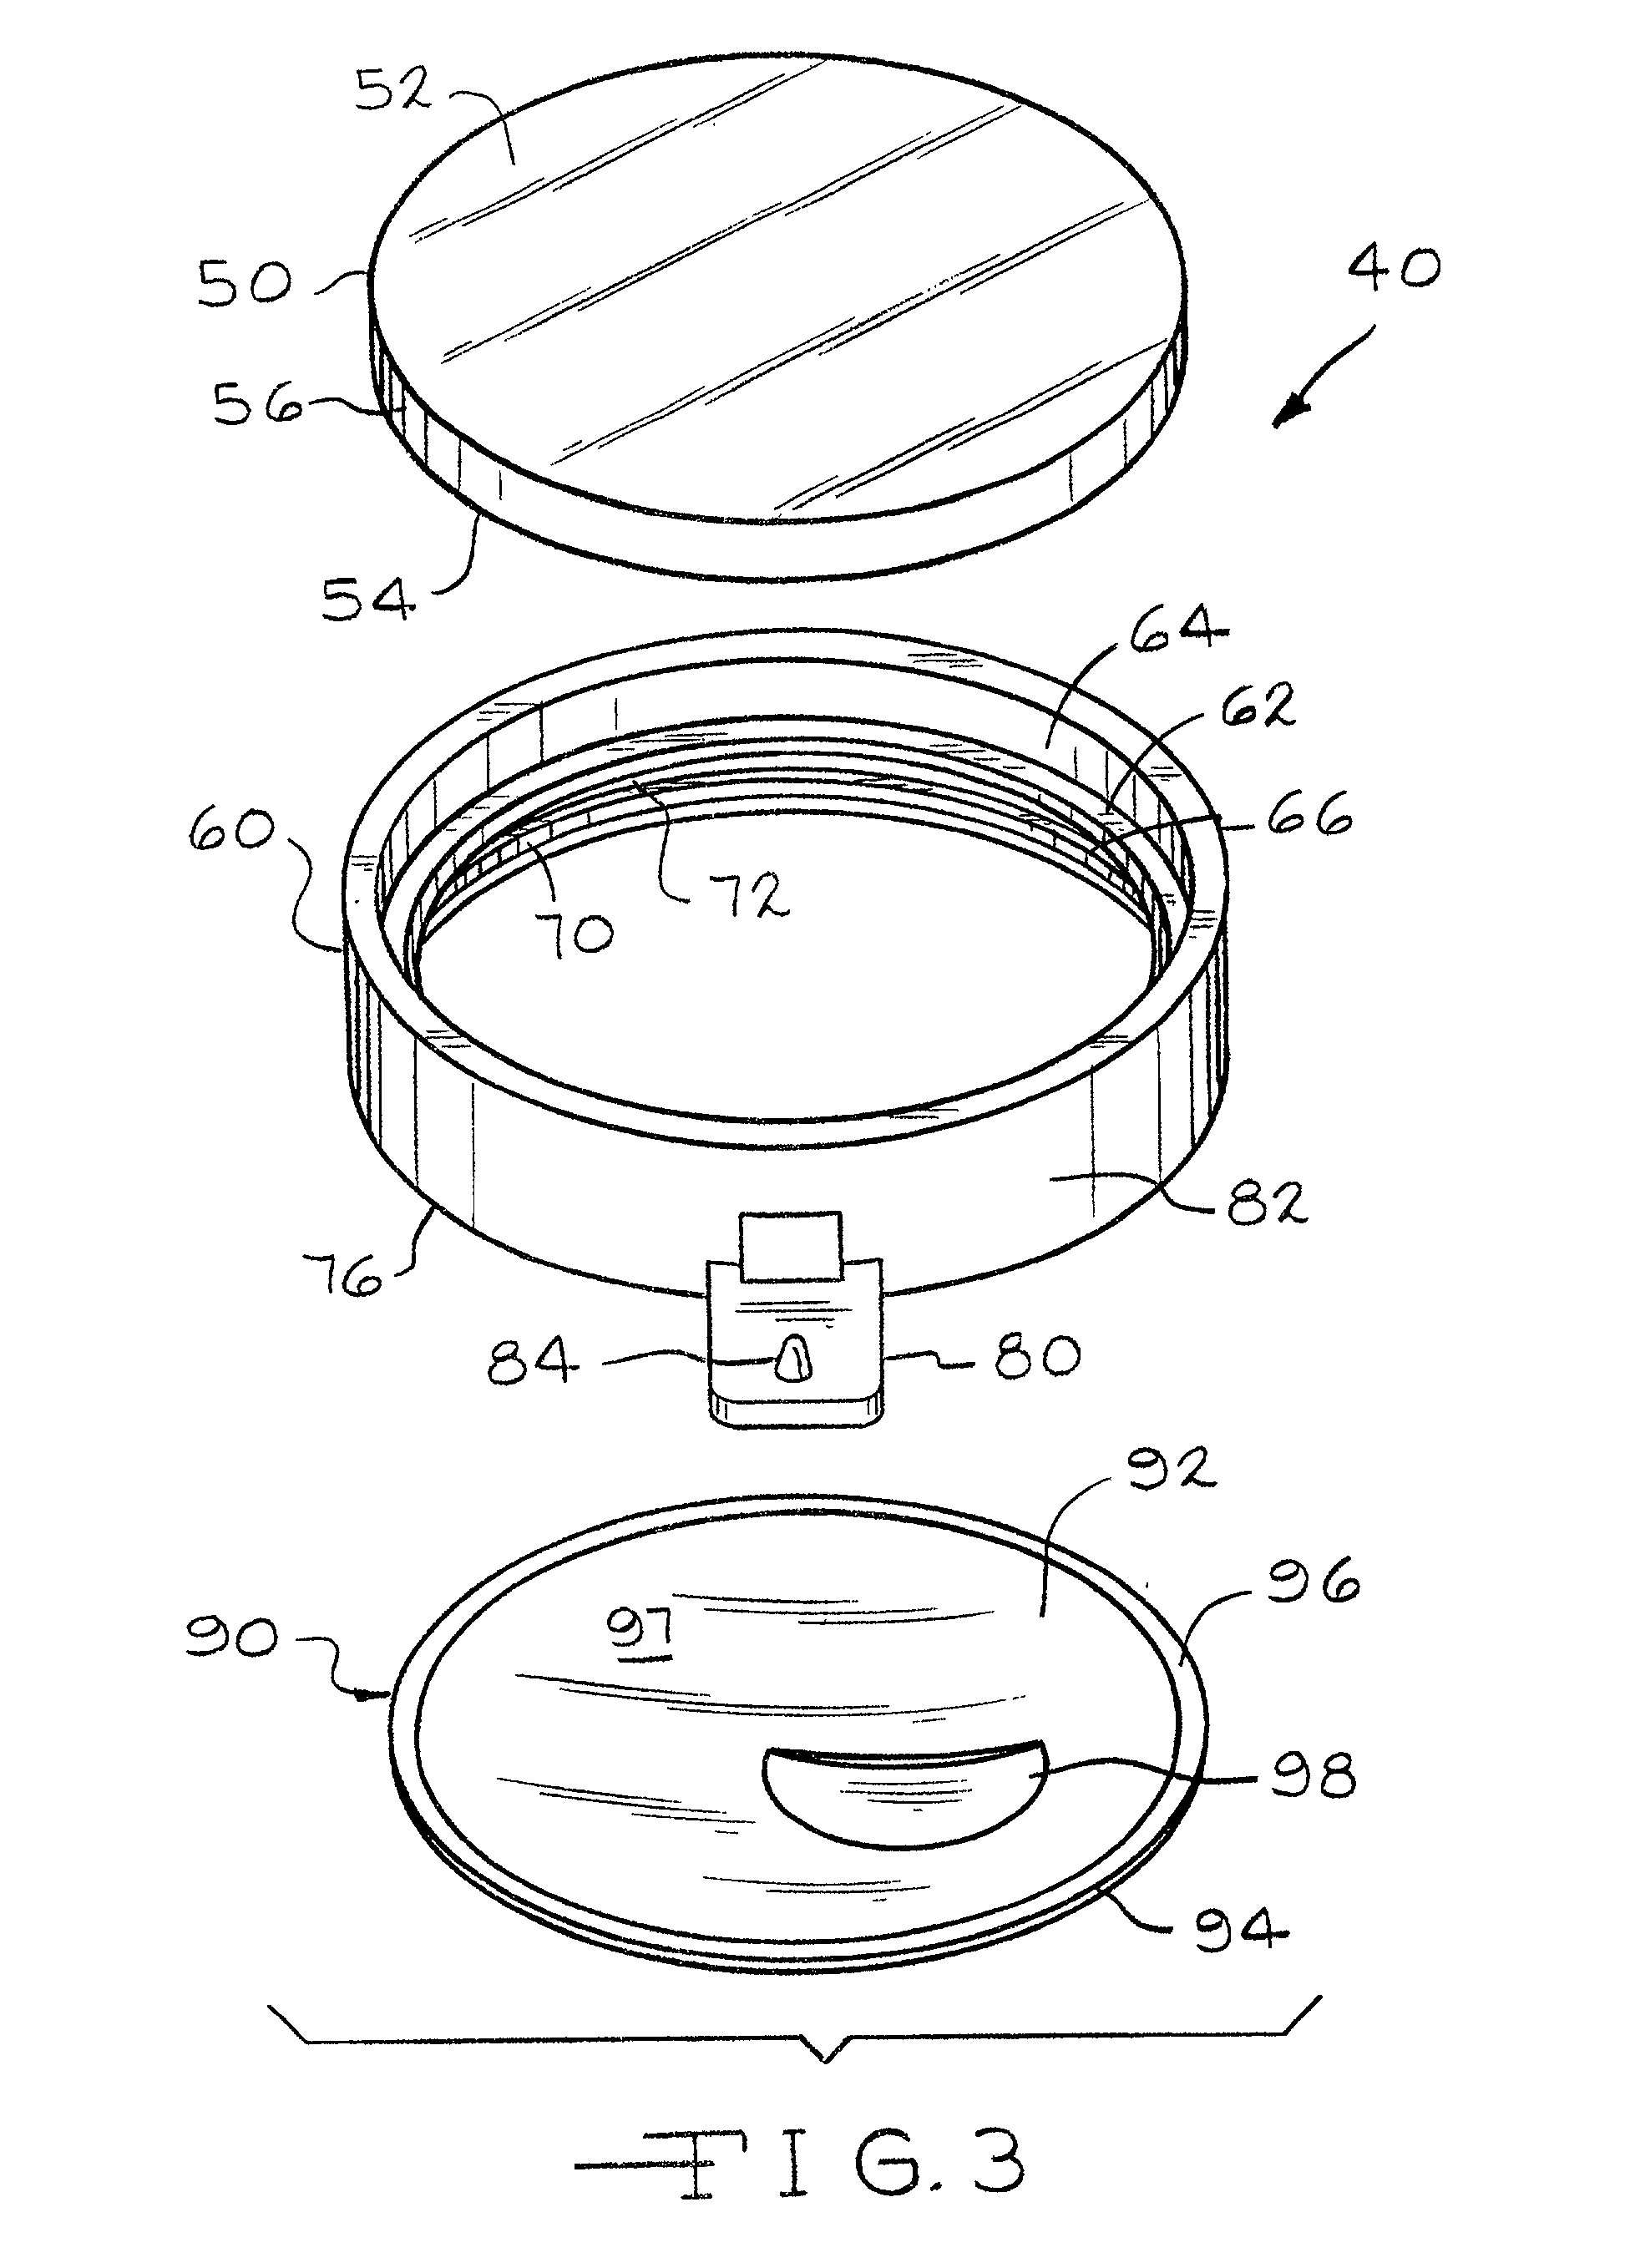 Method and compositions for manufacturing plastic optical lens